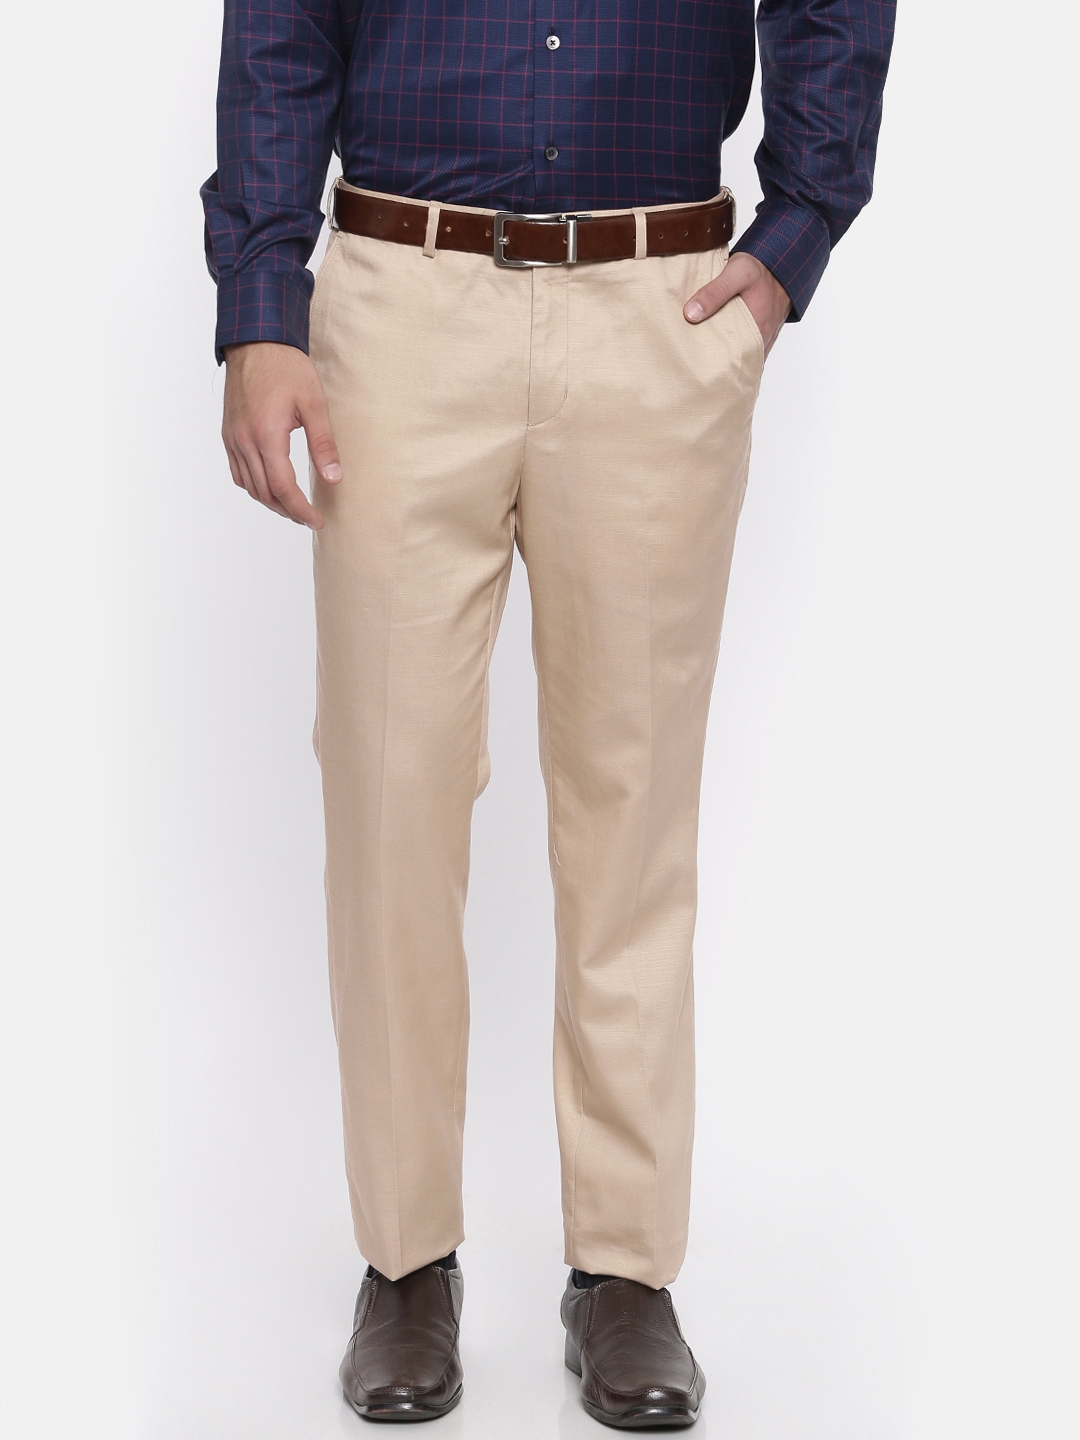 ColorPlus Formal Trousers  Buy ColorPlus Tailored Fit Solid Brown Trouser  Online  Nykaa Fashion